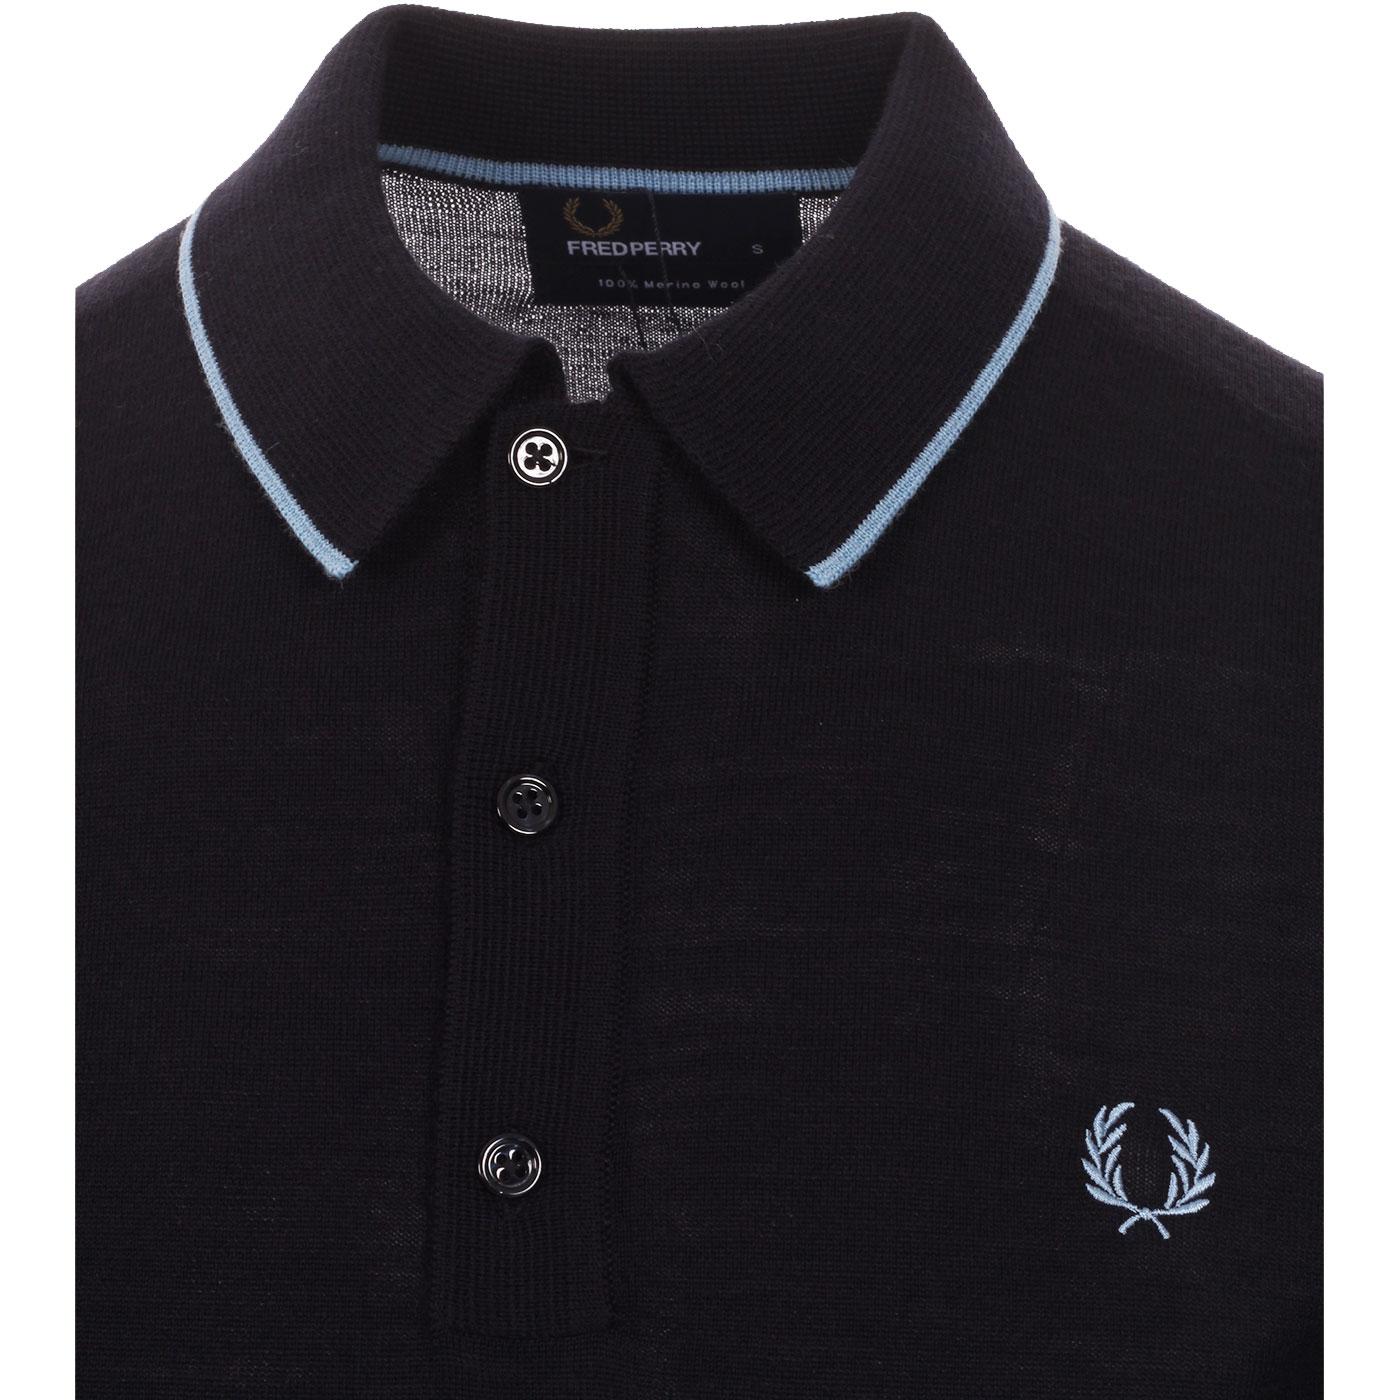 FRED PERRY Retro Mod Merino Wool Tipped Polo Shirt in Navy